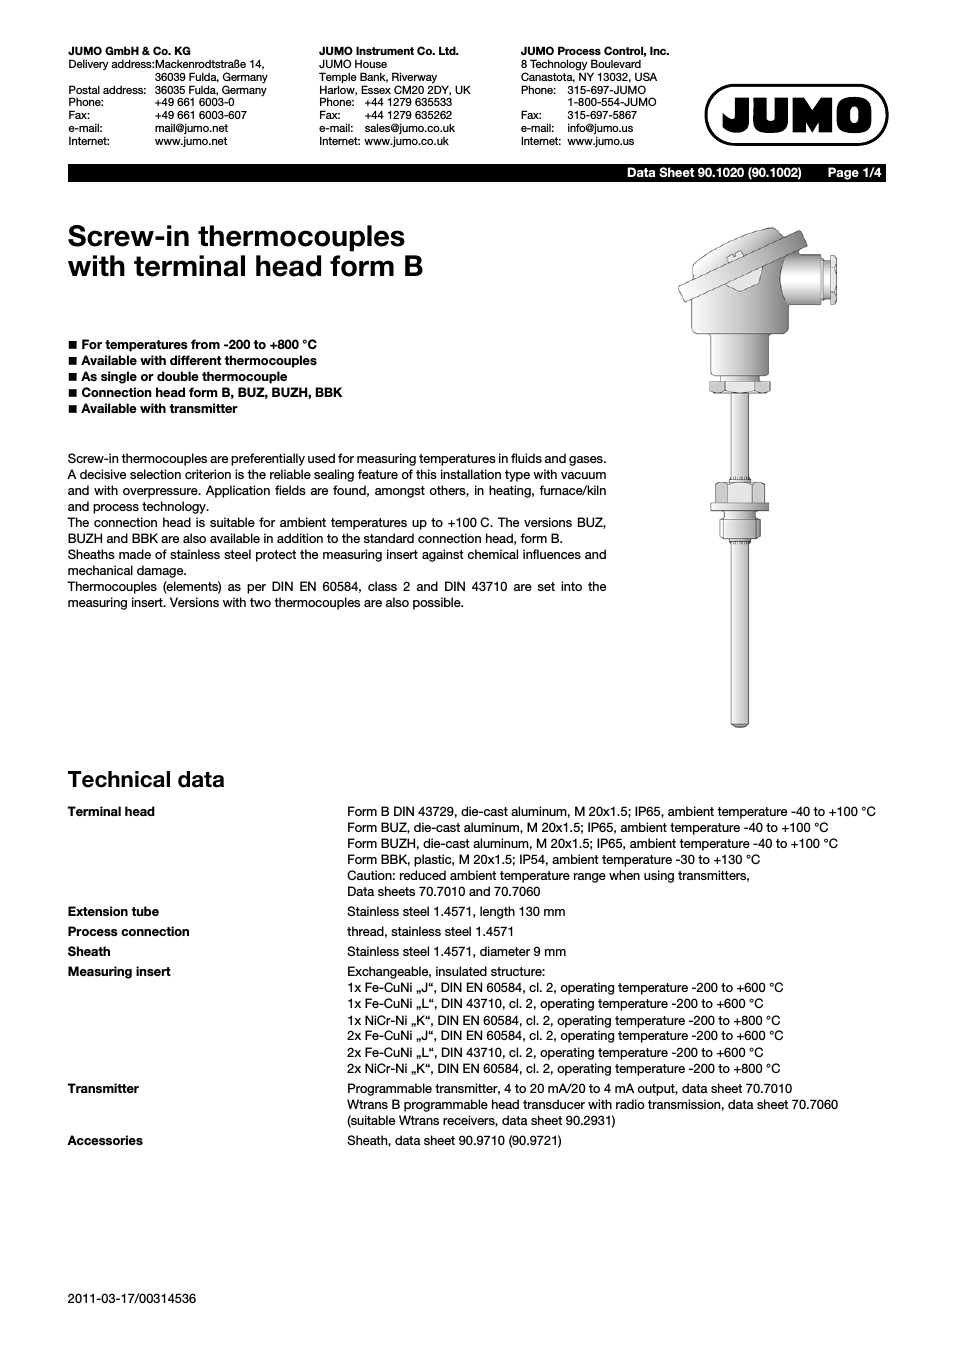 901020 Screw-In Thermocouples with Terminal Head Form B Data Sheet